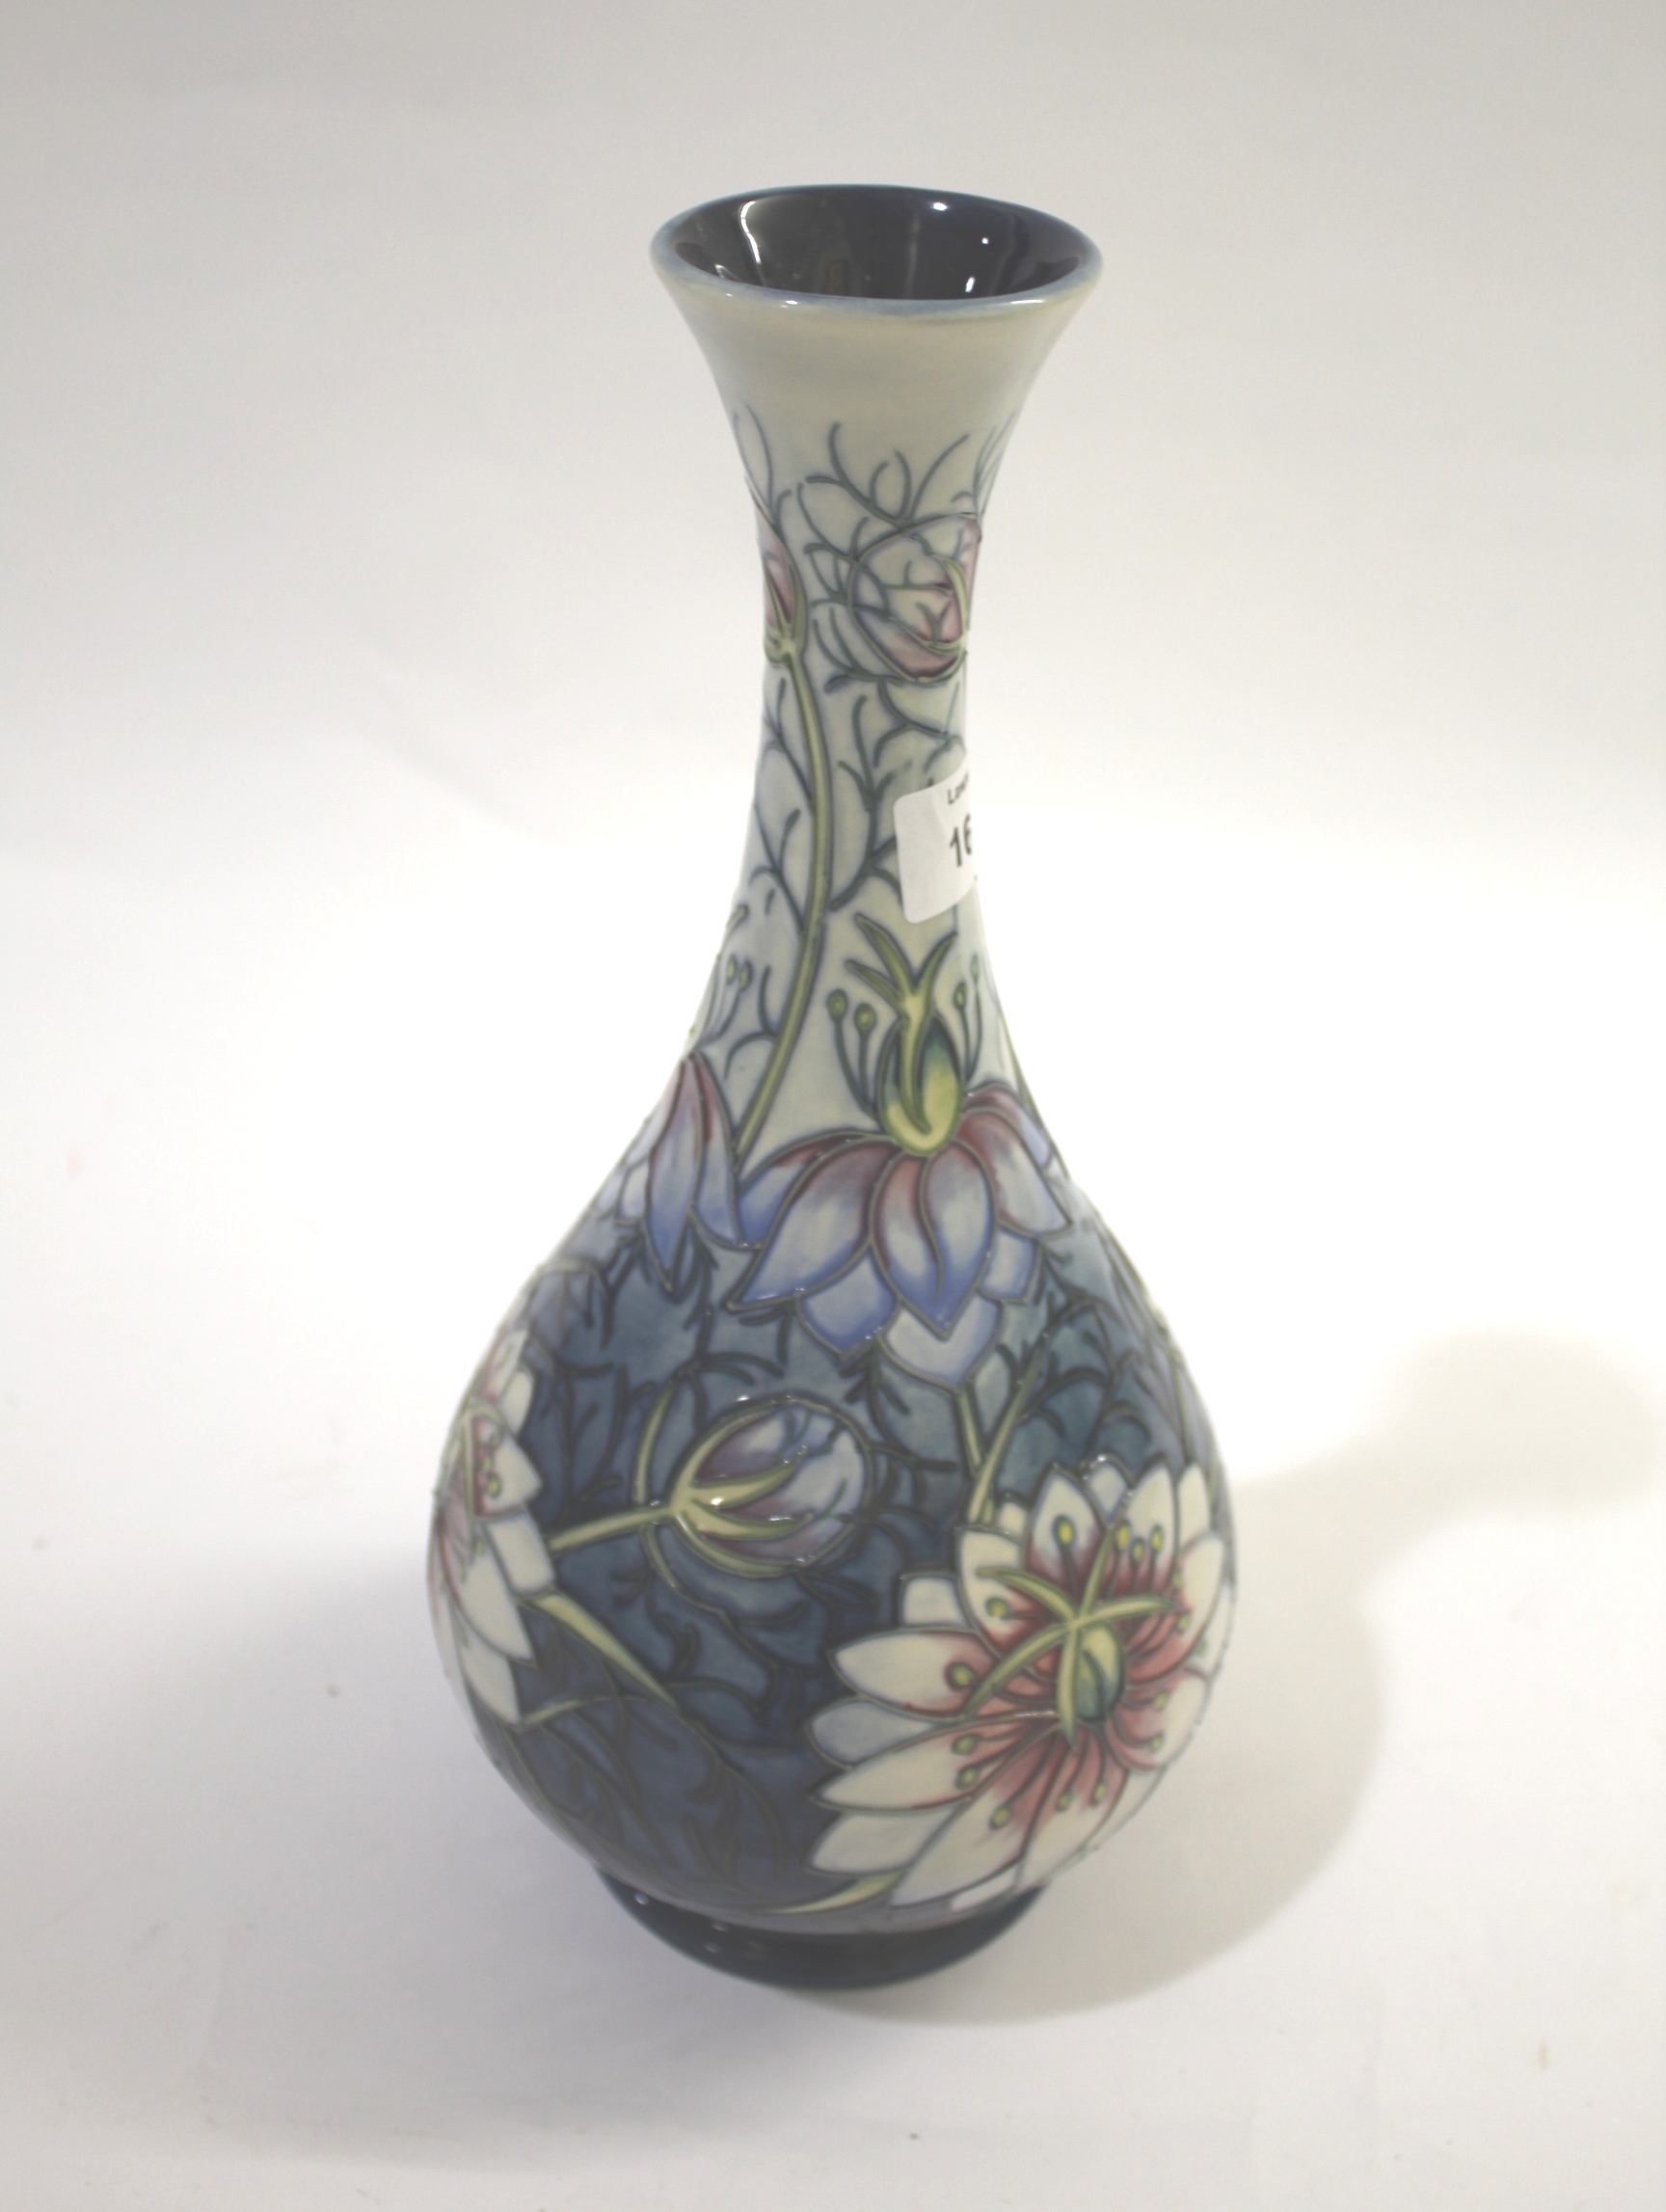 MOORCROFT VASE - LOVE IN A MIST a boxed modern Moorcroft limited edition vase in the Love in a - Image 3 of 5